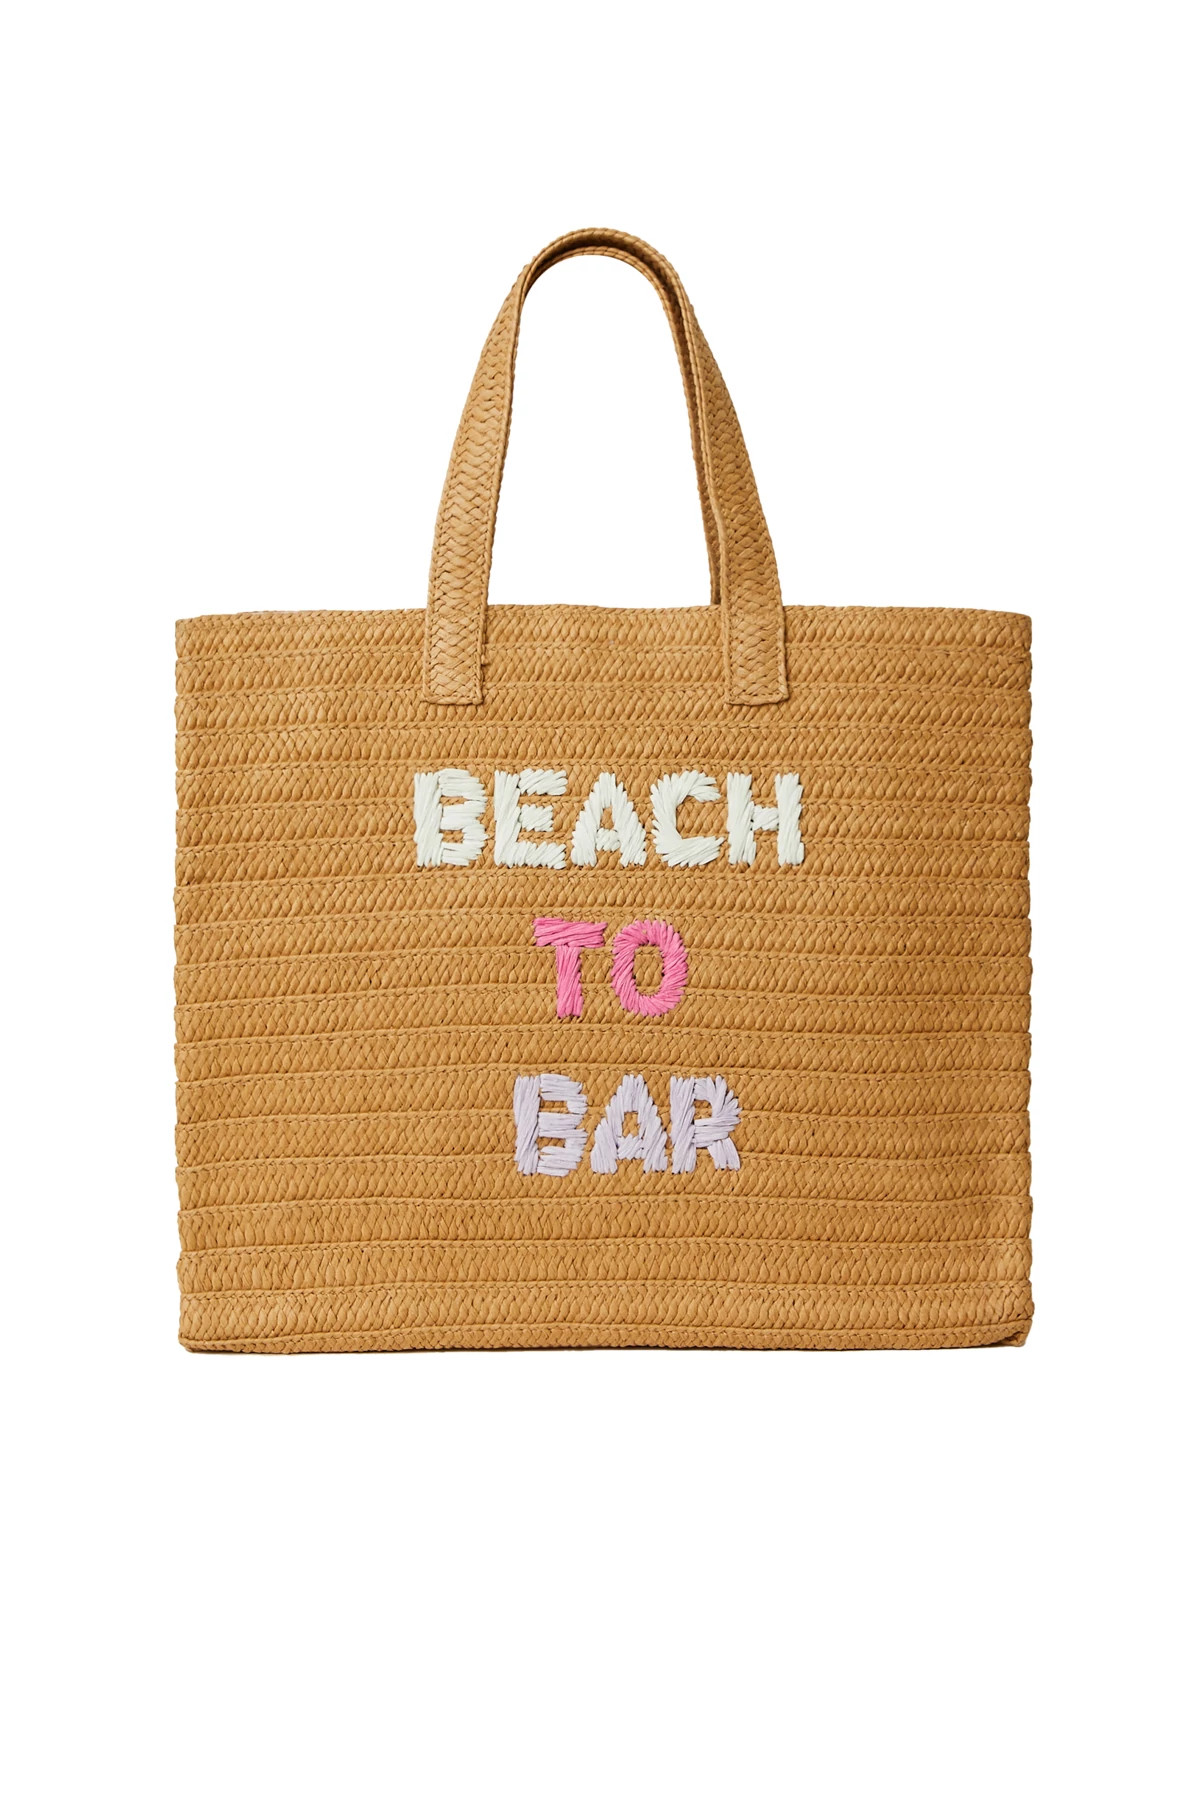 SAND RAINBOW Beach To Bar Tote image number 1